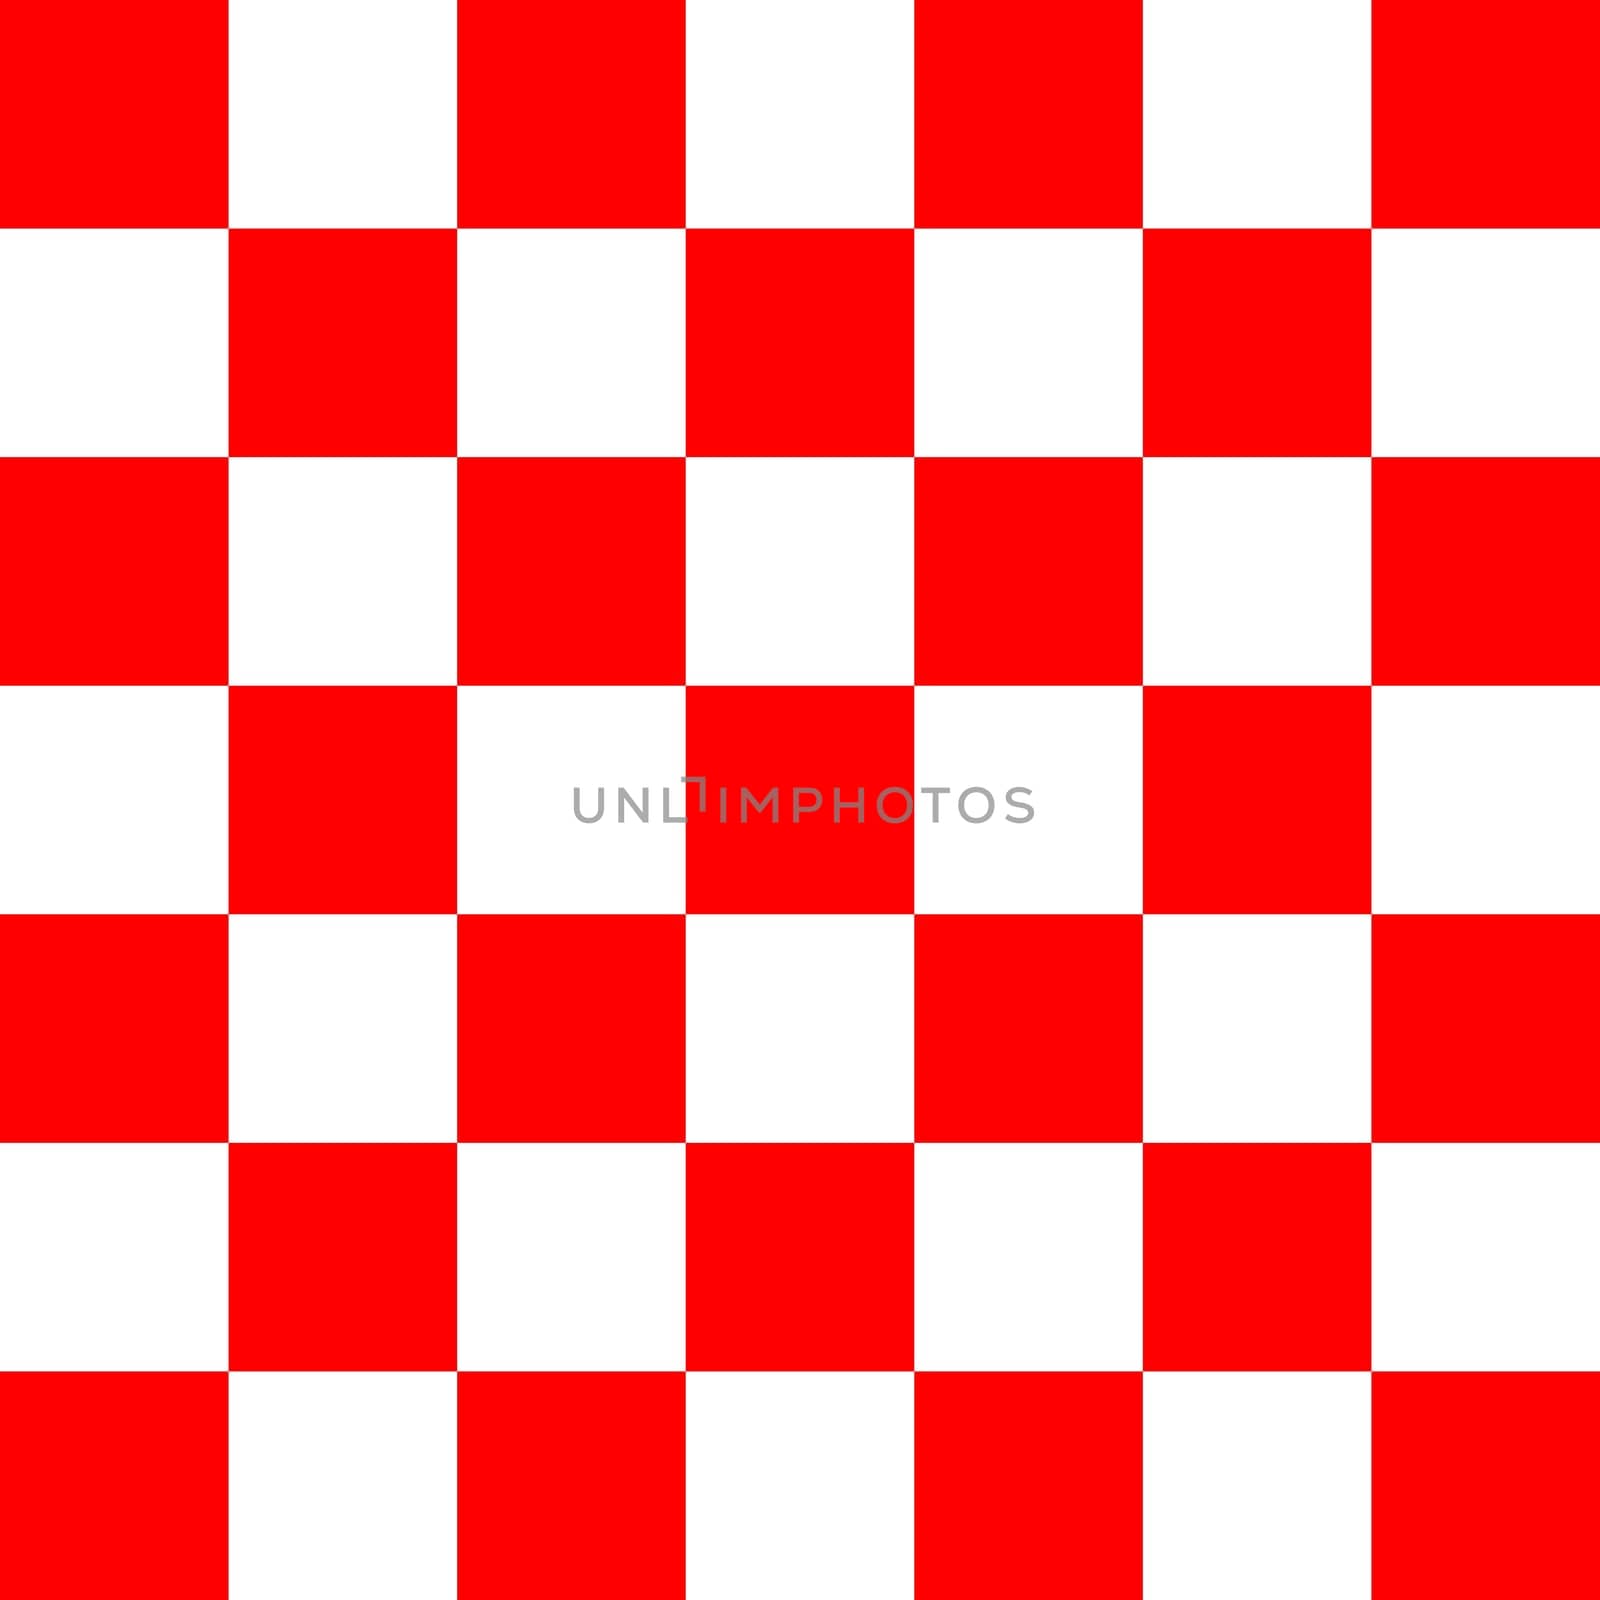 Red and white racing checkered color square tiles, seamless abstract background illustration.